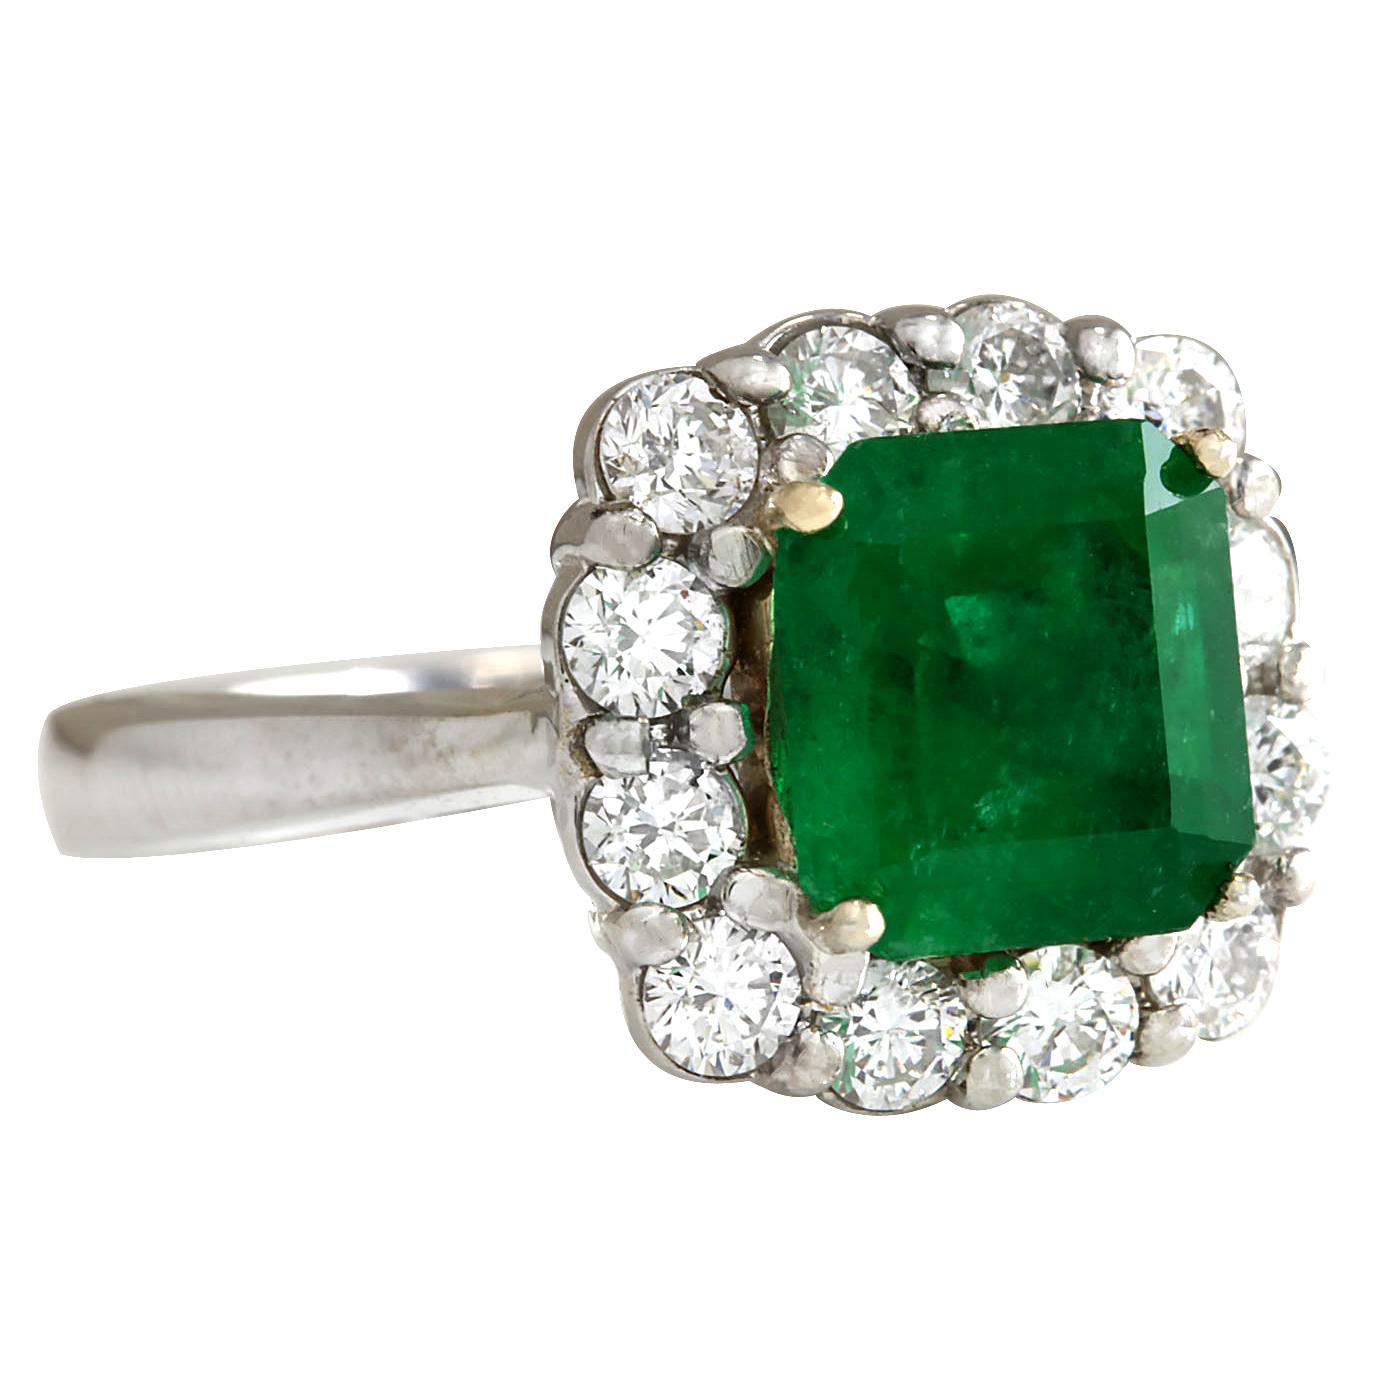 Stamped: 18K White Gold
Total Ring Weight: 6.0 Grams
Ring Length: N/A
Ring Width: N/A
Gemstone Weight: Total Natural Emerald Weight is 2.30 Carat (Measures: 8.41x7.99 mm)
Color: Green
Diamond Weight: Total Natural Diamond Weight is 0.85 Carat
Color: